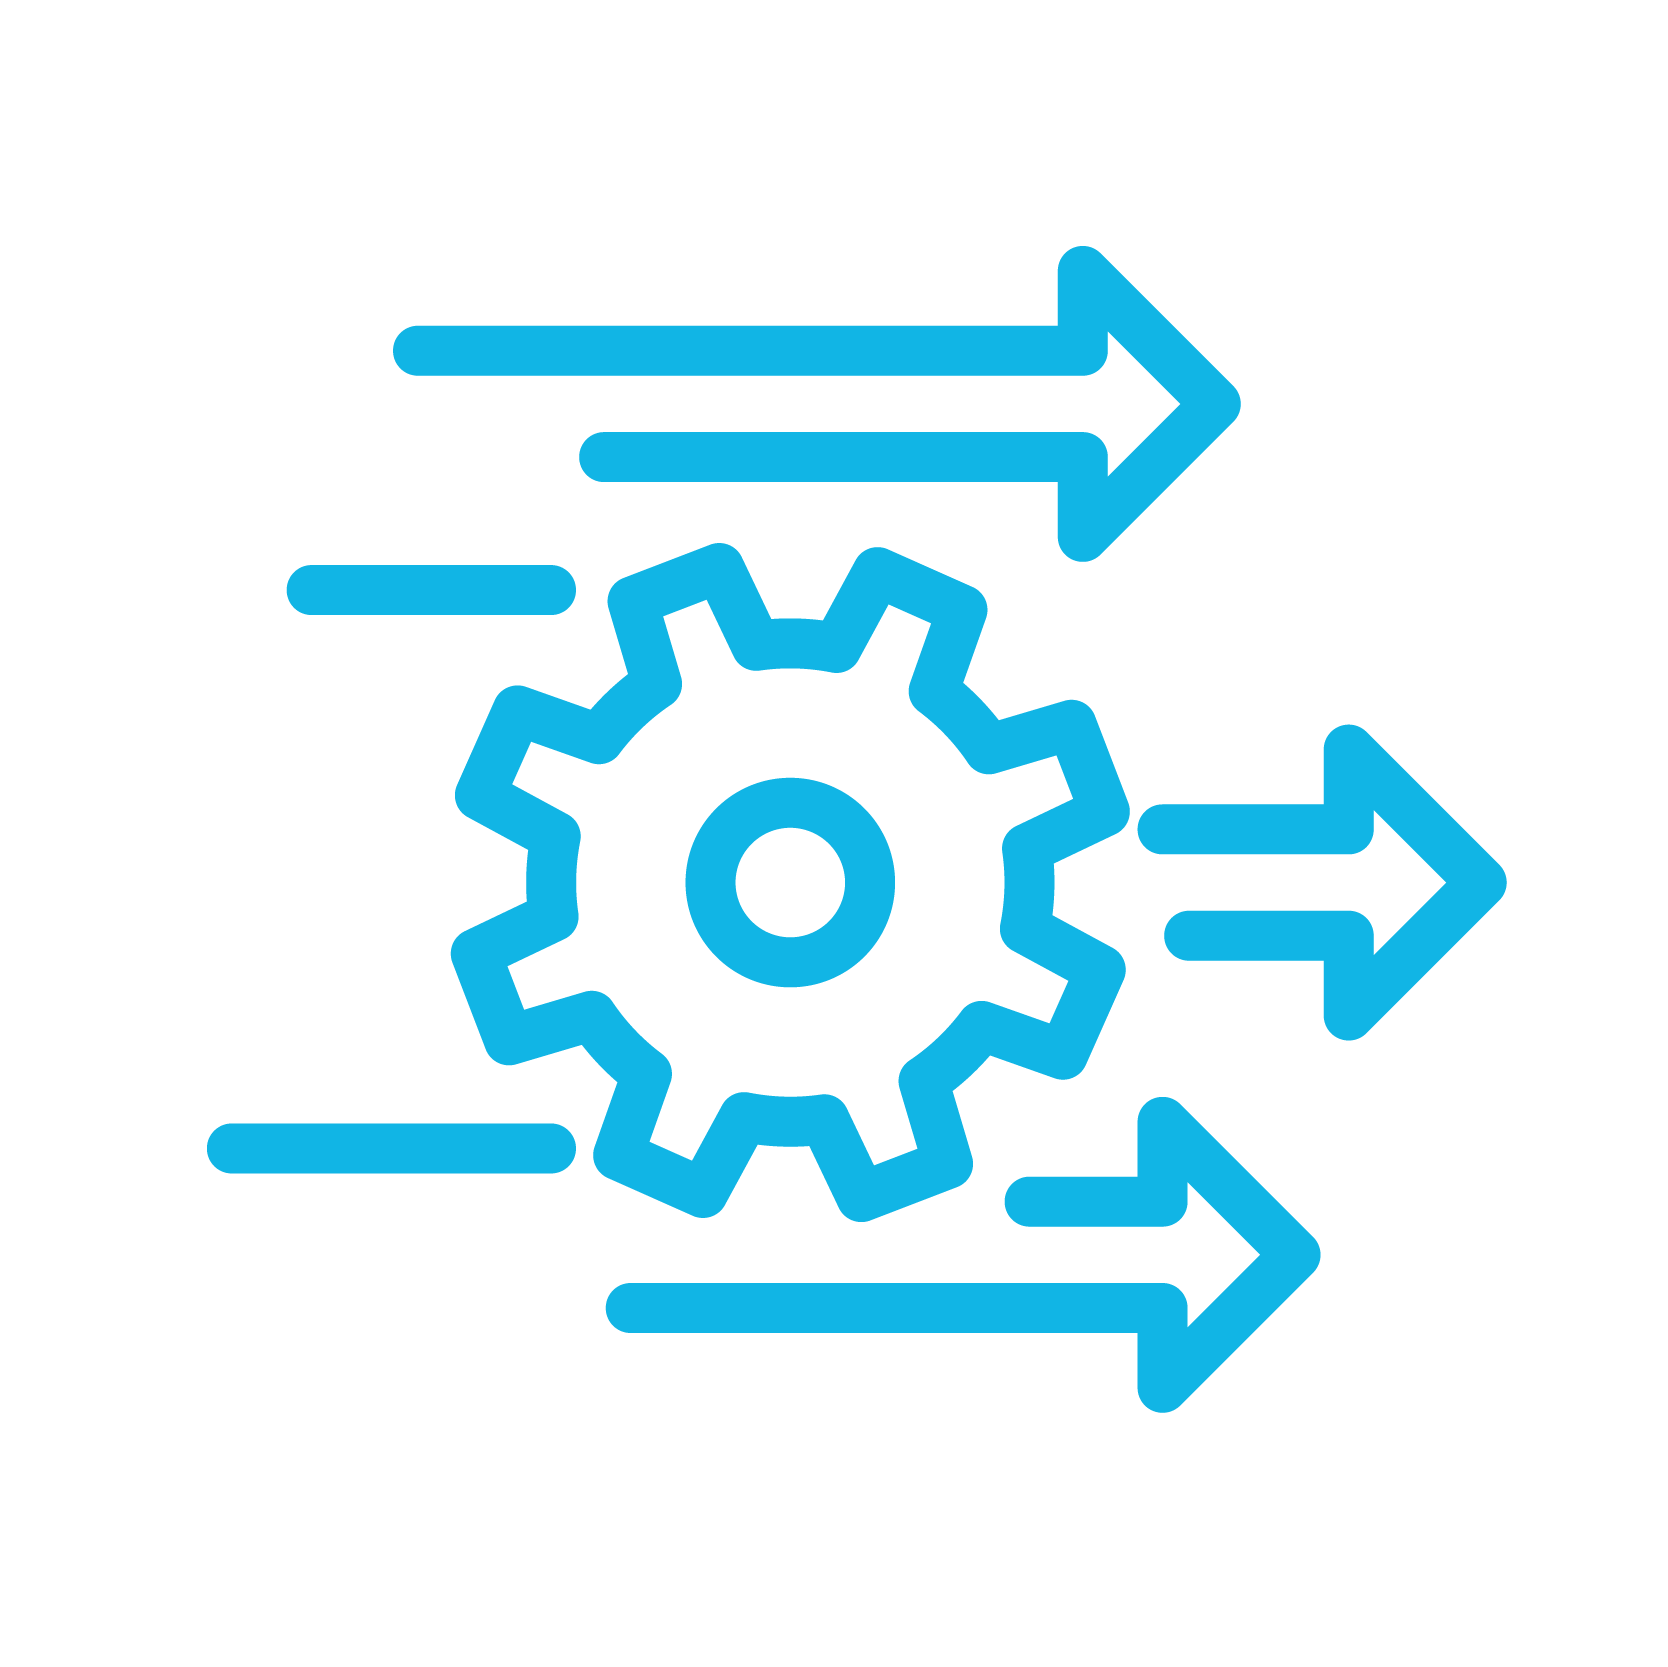 Data Integration - An icon of arrows speeding past a gear, representing how HammerTech is able to integrate with other tools for cohesive data management.